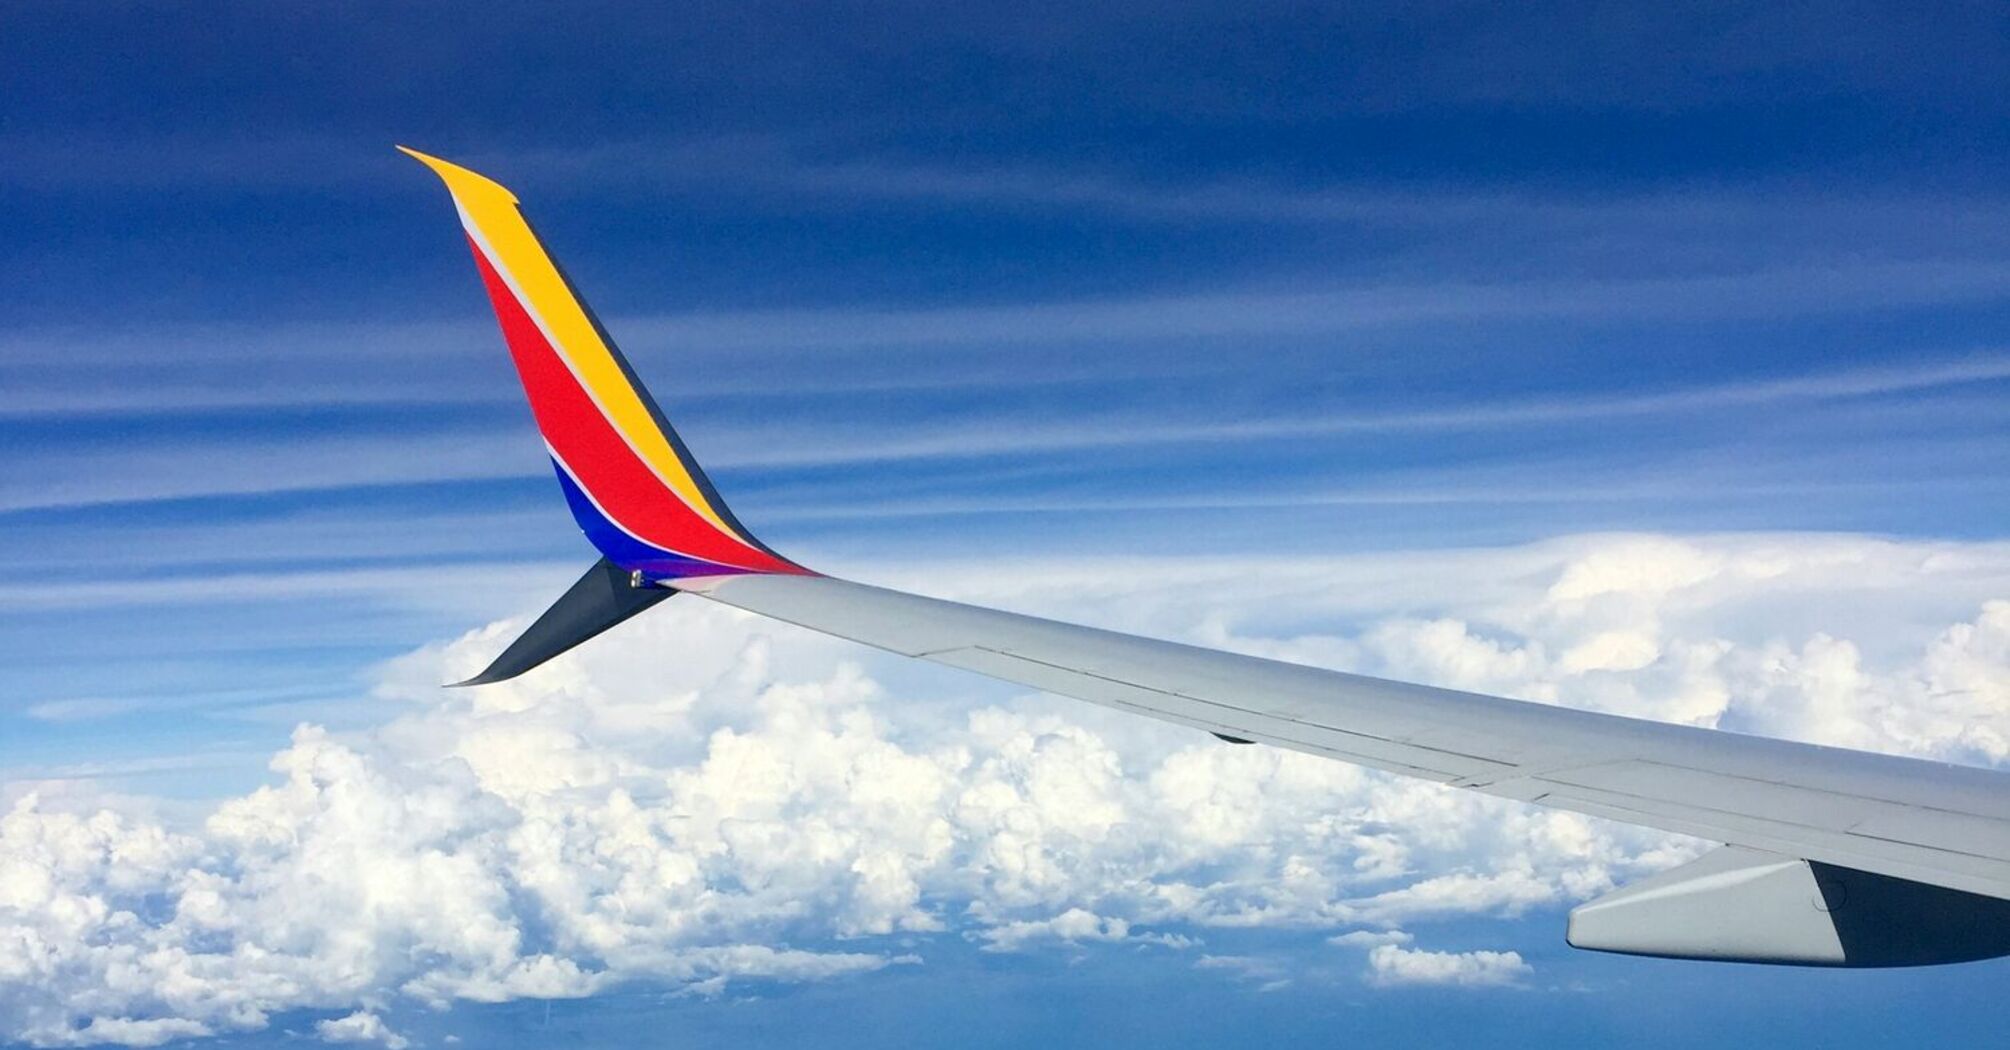 View of an airplane wing hovering above the clouds against a clear blue sky